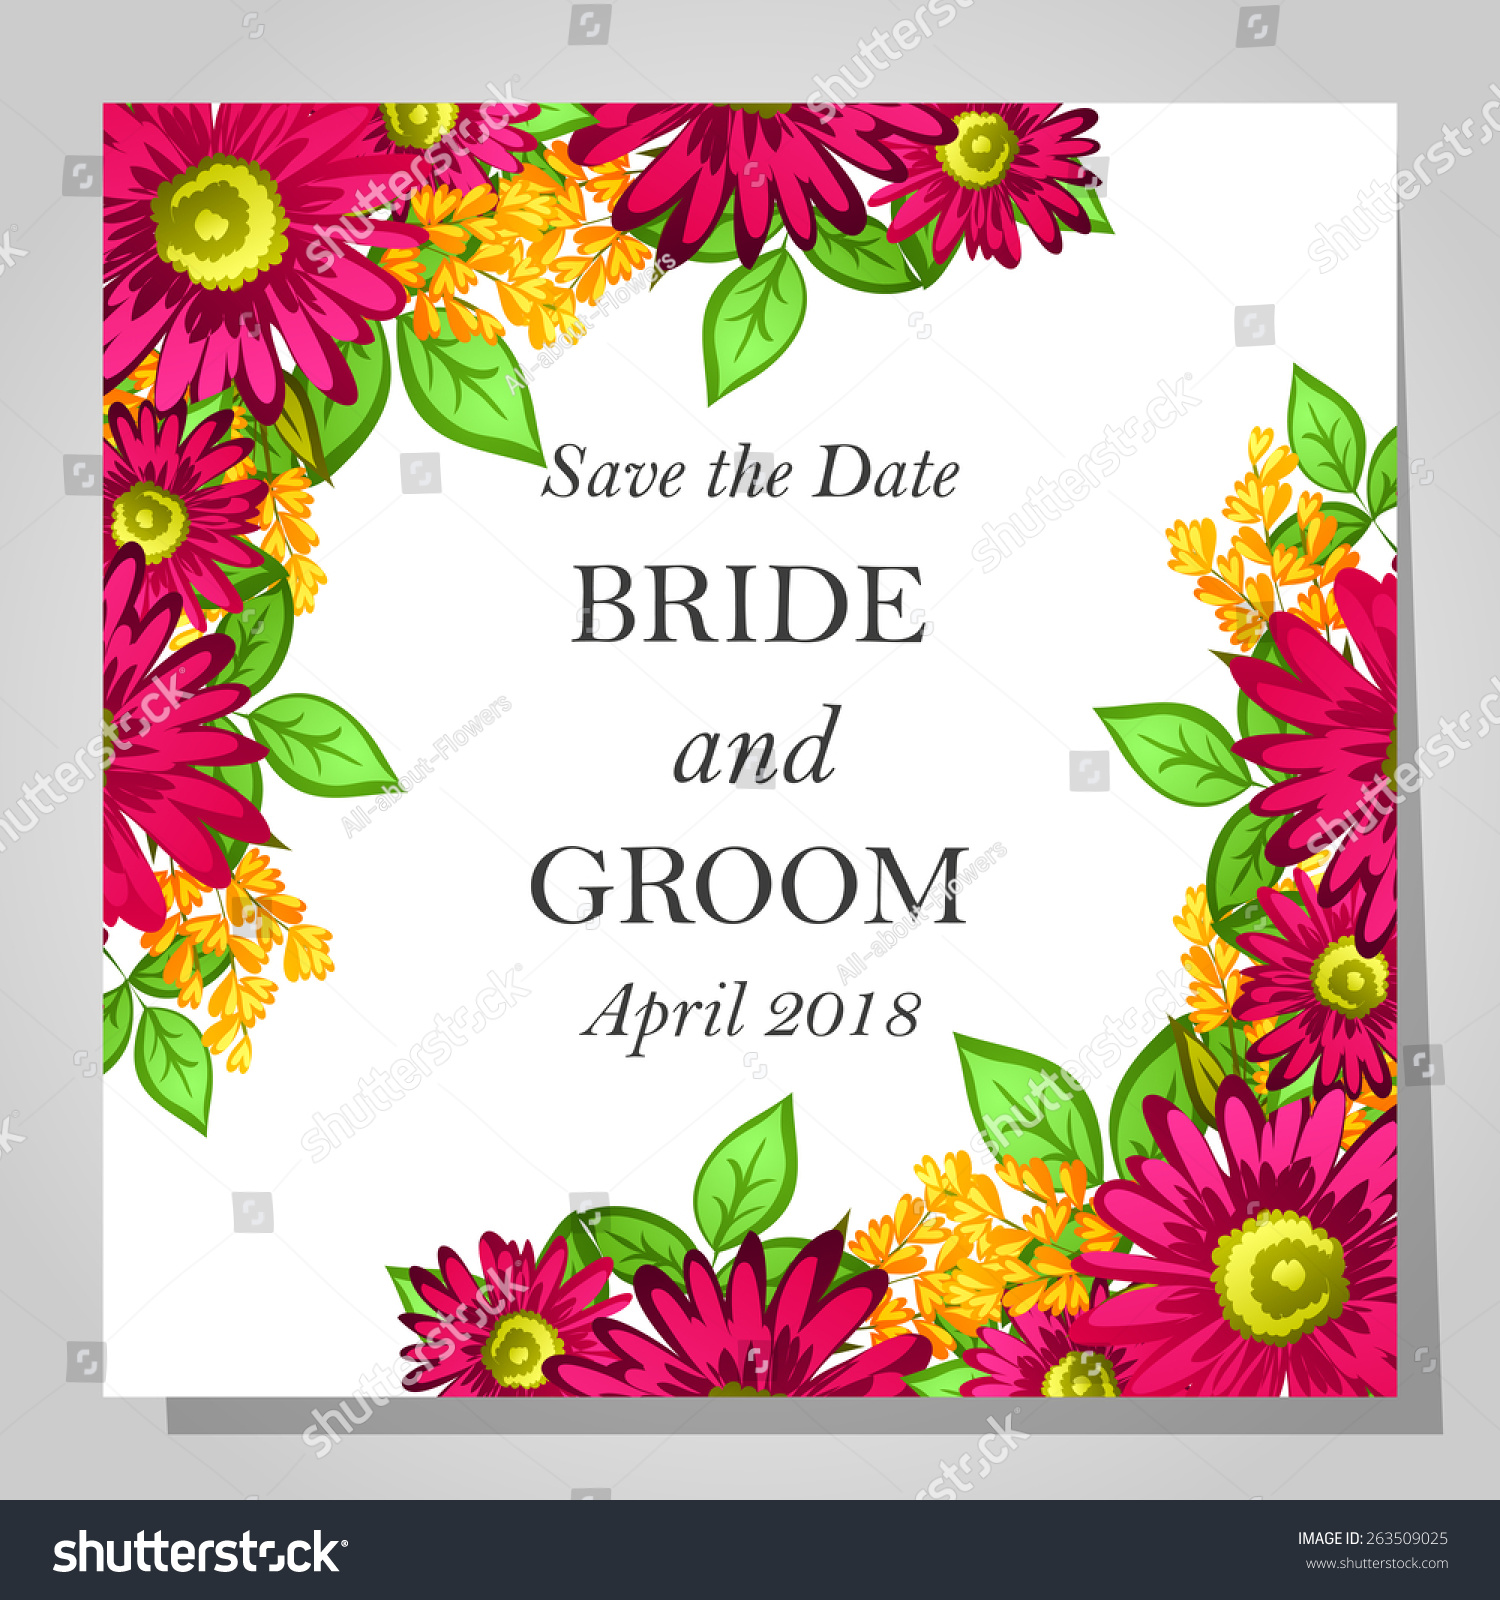 Wedding Invitation Cards Floral Elements Stock Vector (Royalty Free ...